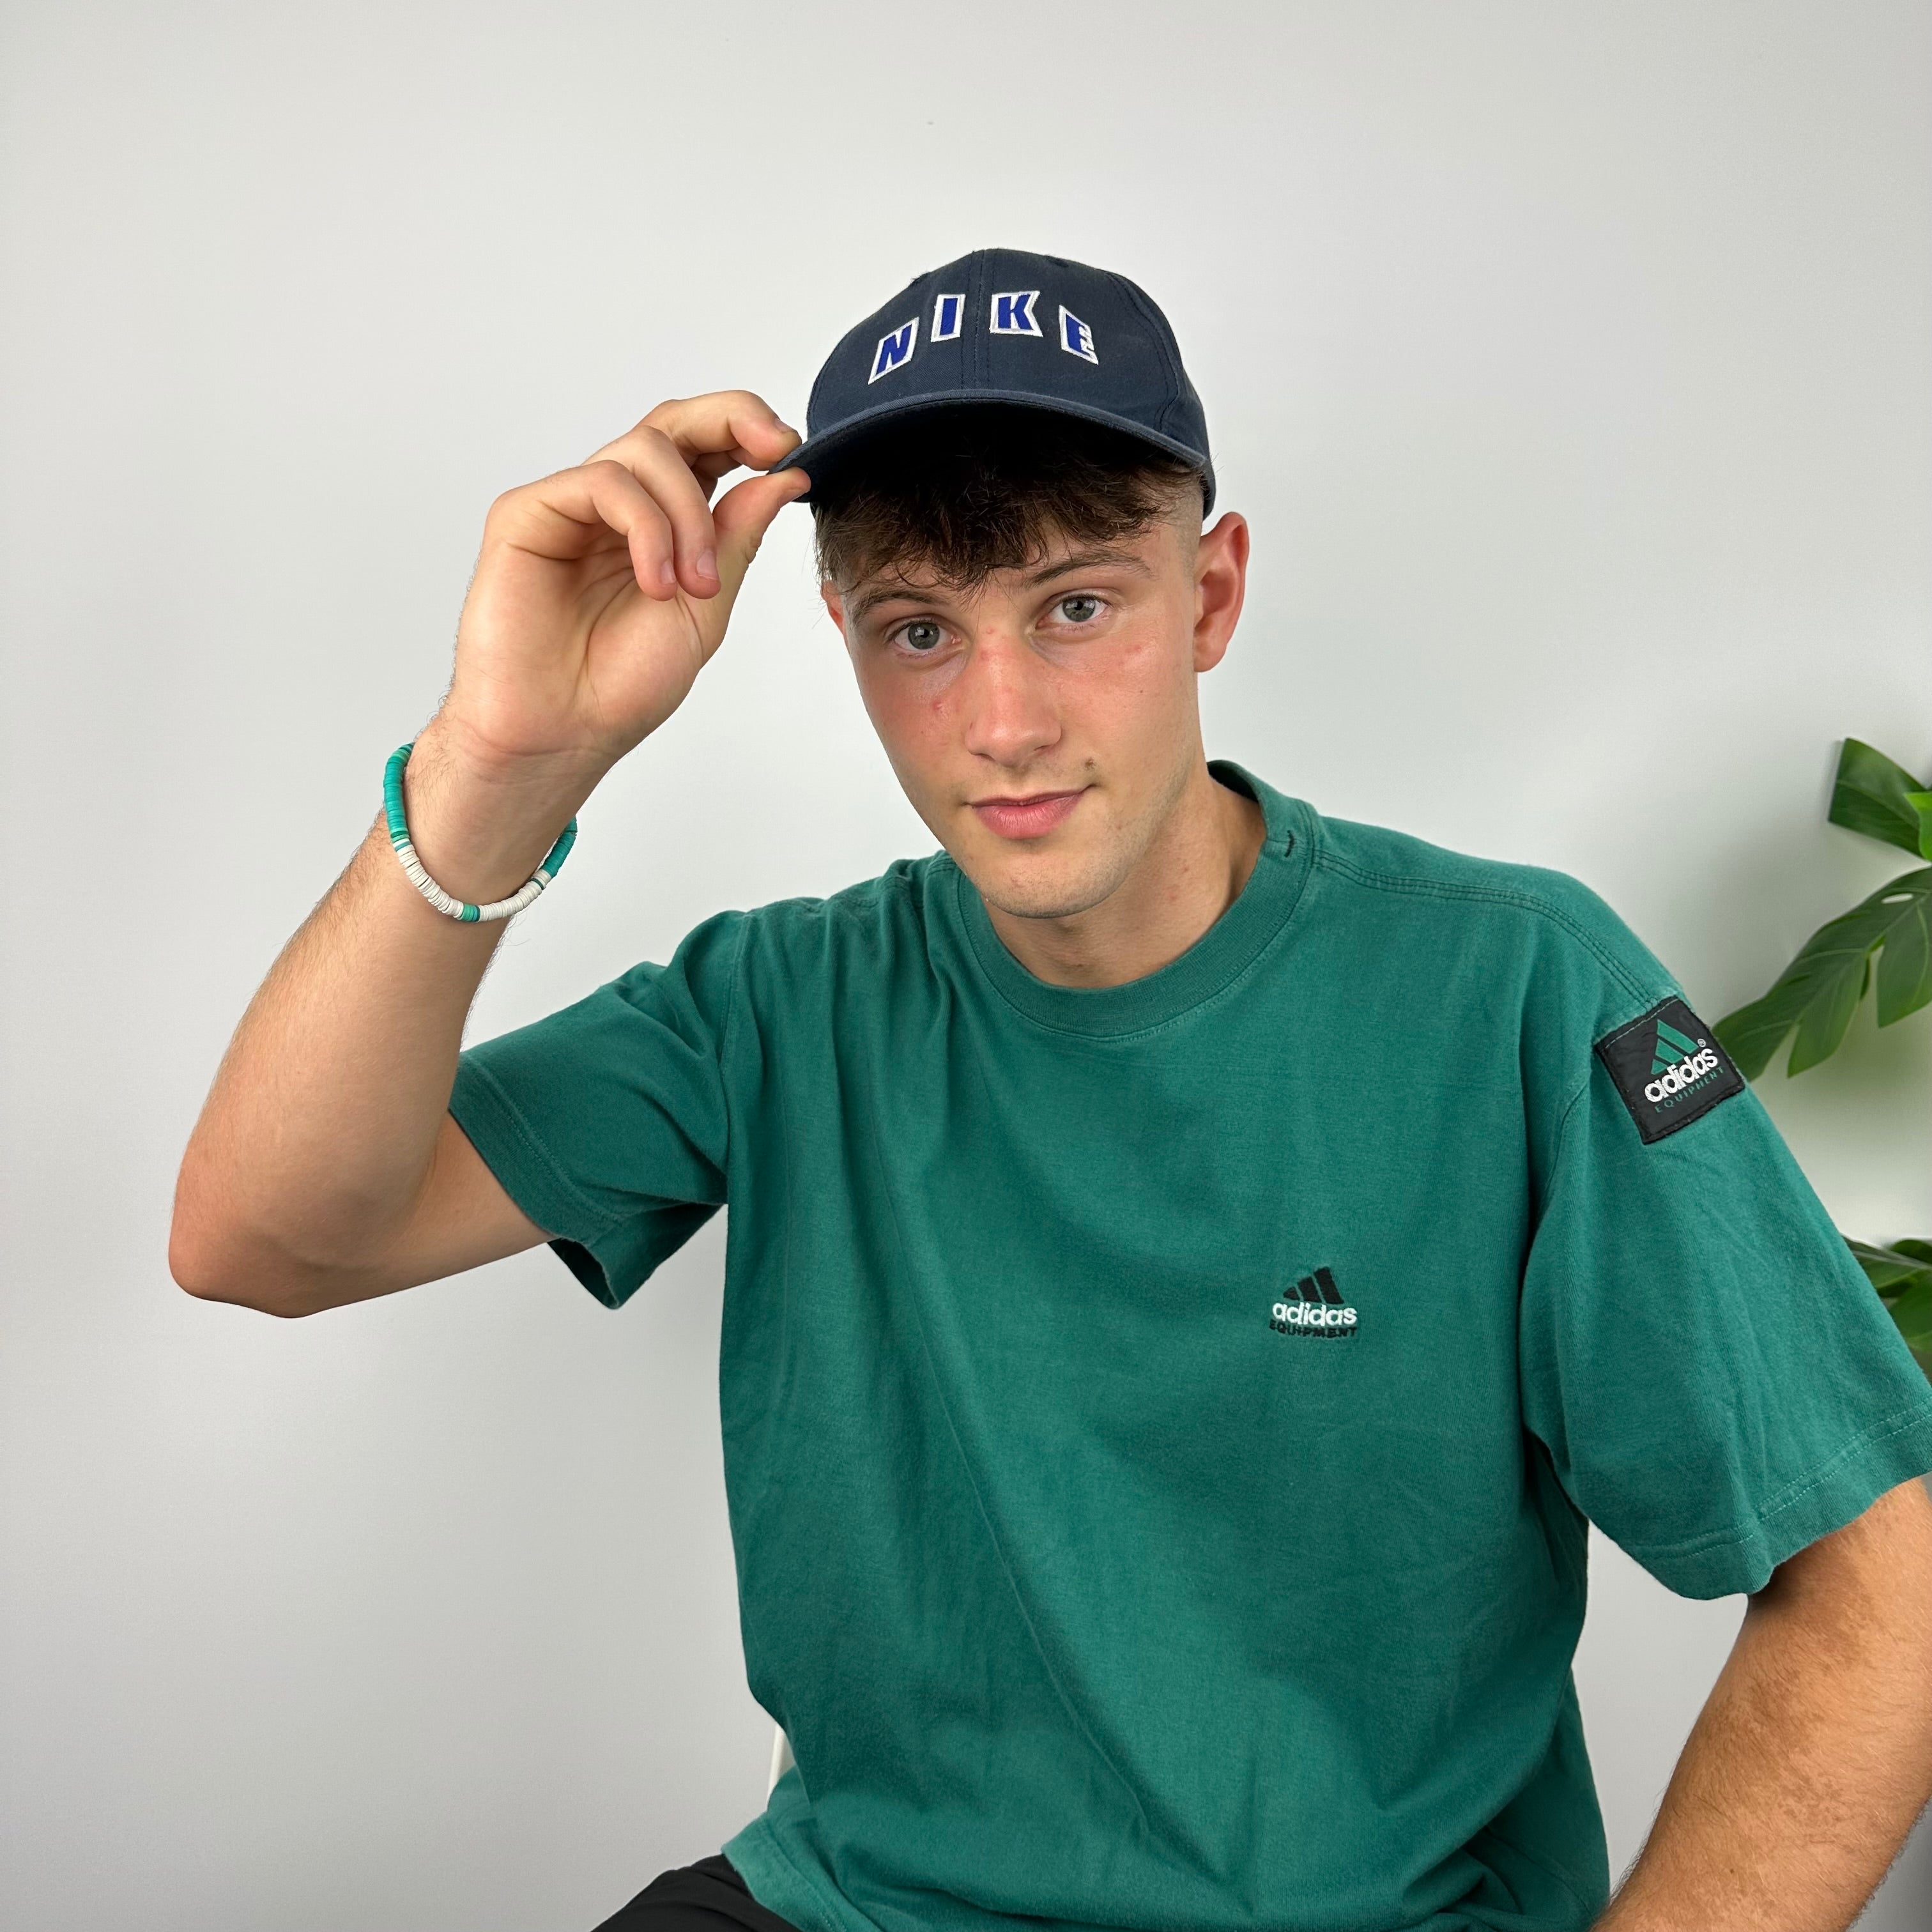 Nike RARE Navy Embroidered Spell Out Cap